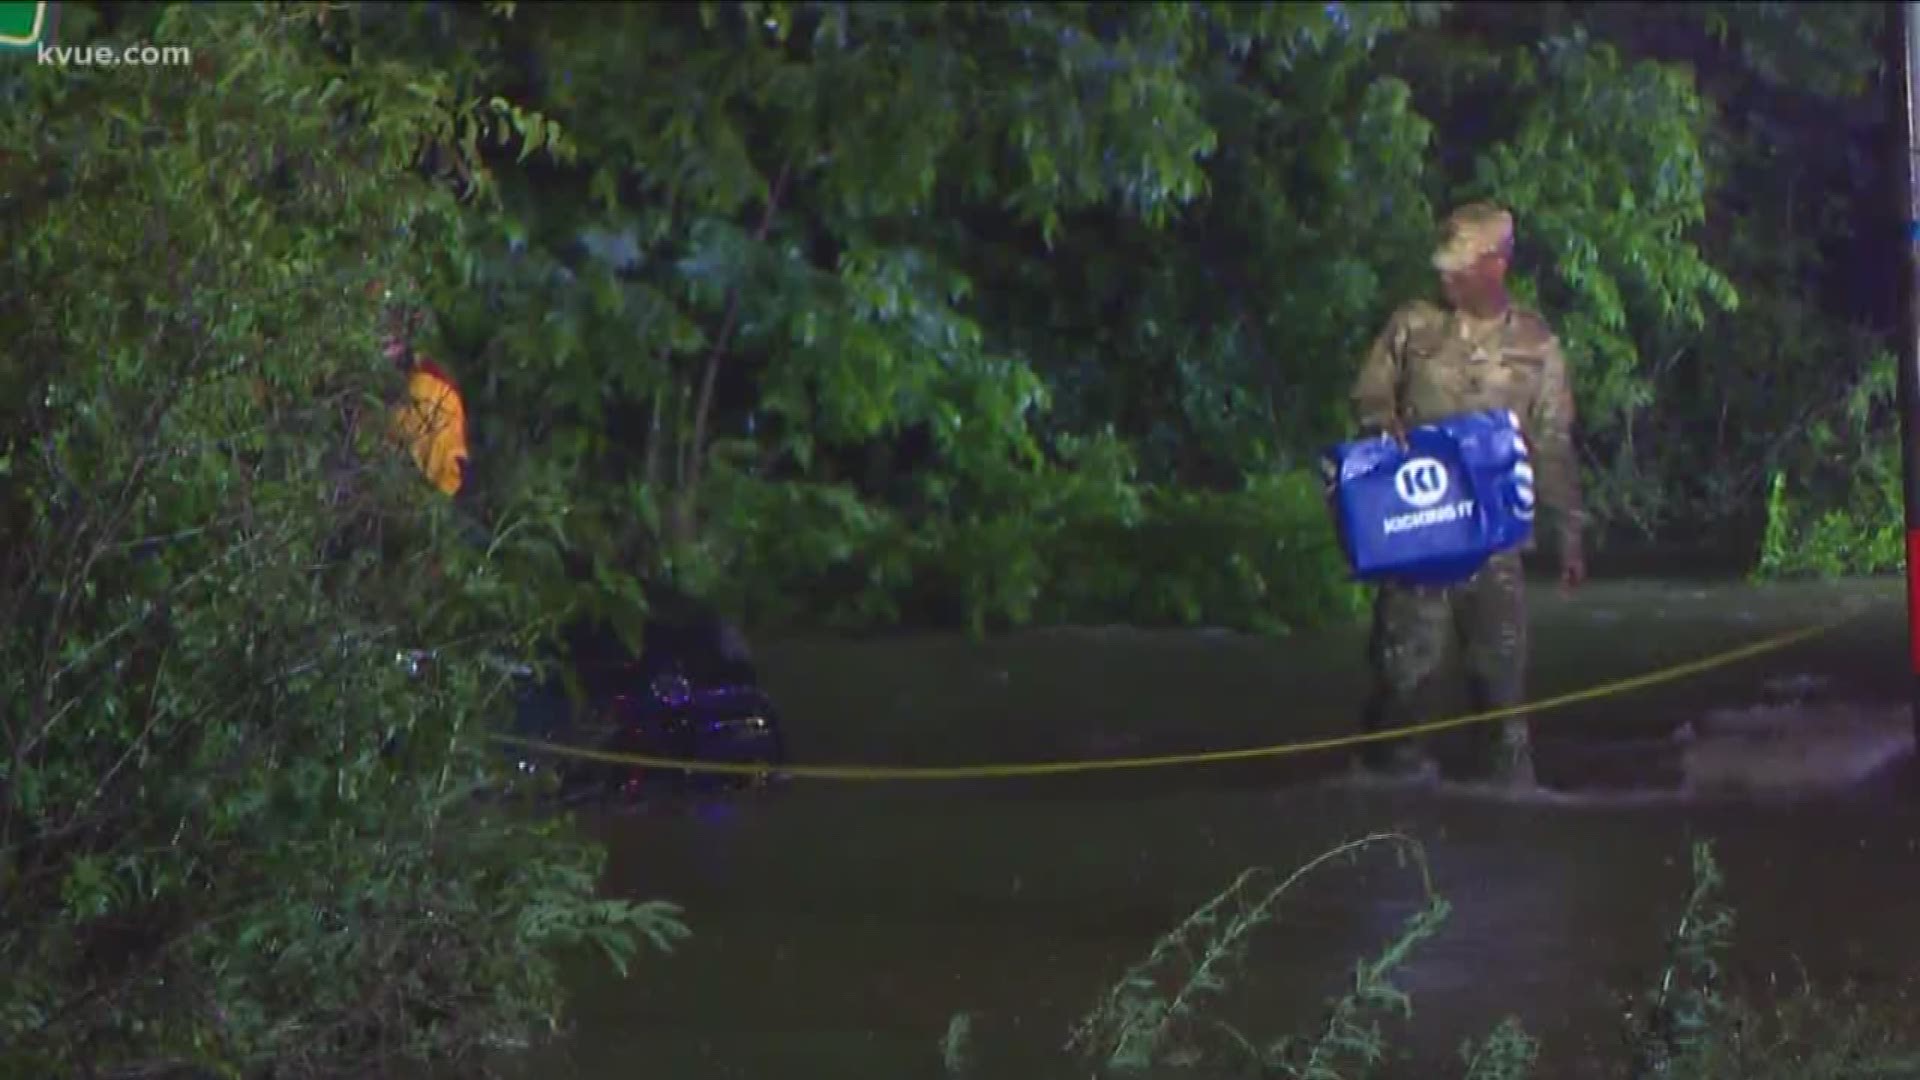 Right after finishing a live shot, KVUE's Molly Oak witnessed a water rescue at FM 969 and Cadillac Drive.